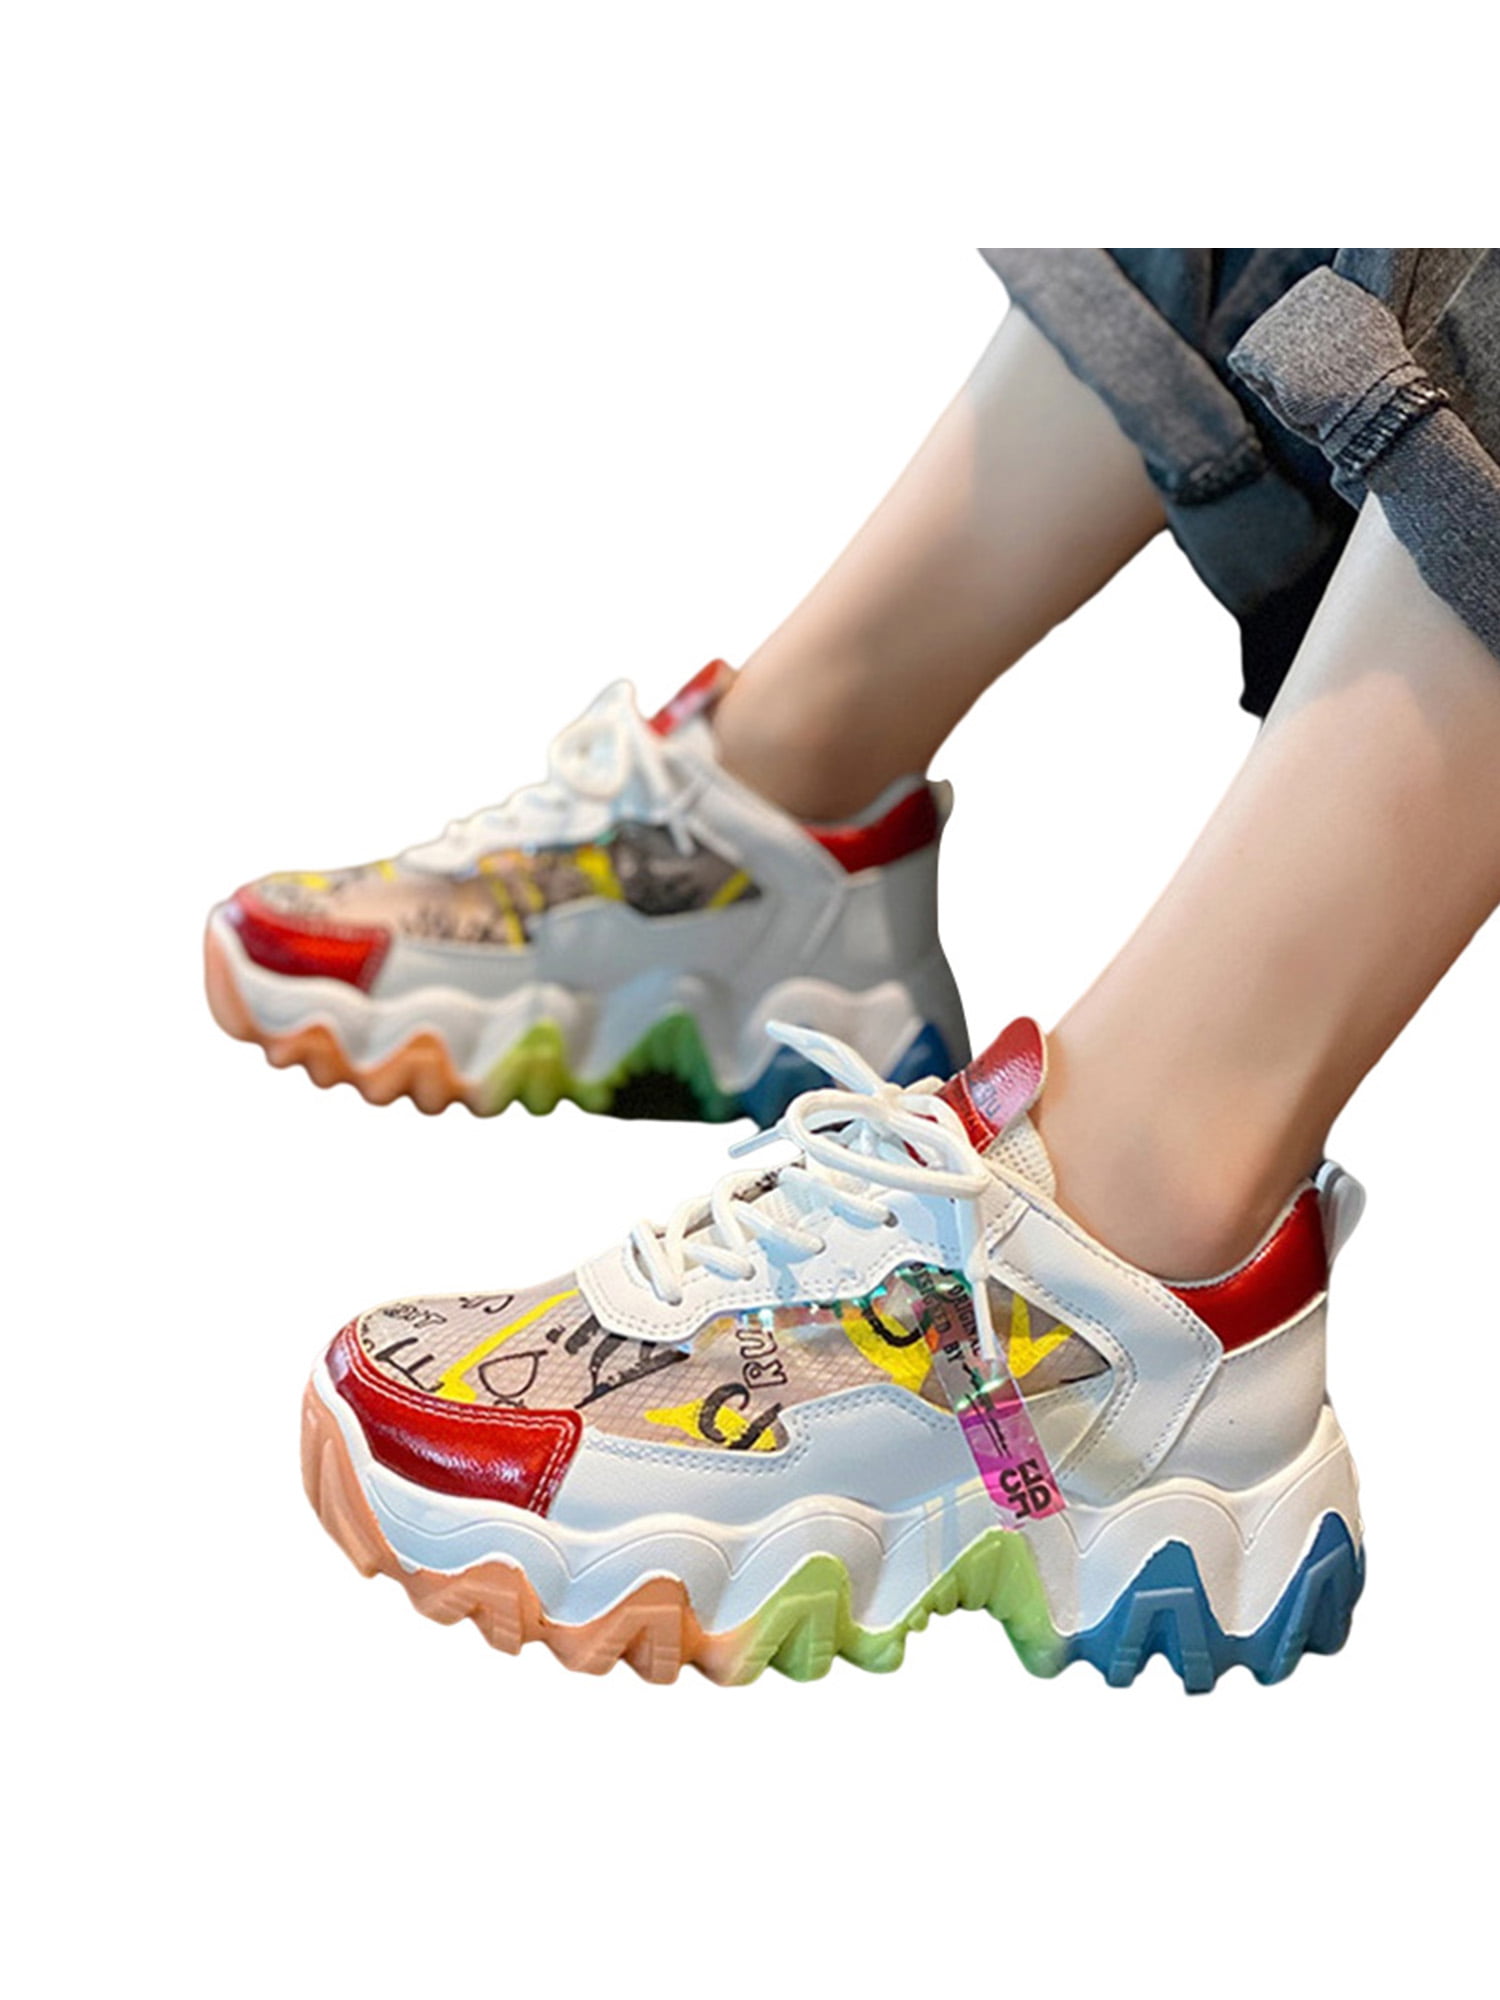 Details about   WOMENS LADIES SPORT CHUNKY SNEAKERS CASUAL RUNNING WALKING TRAINERS WOMEN SHOES 